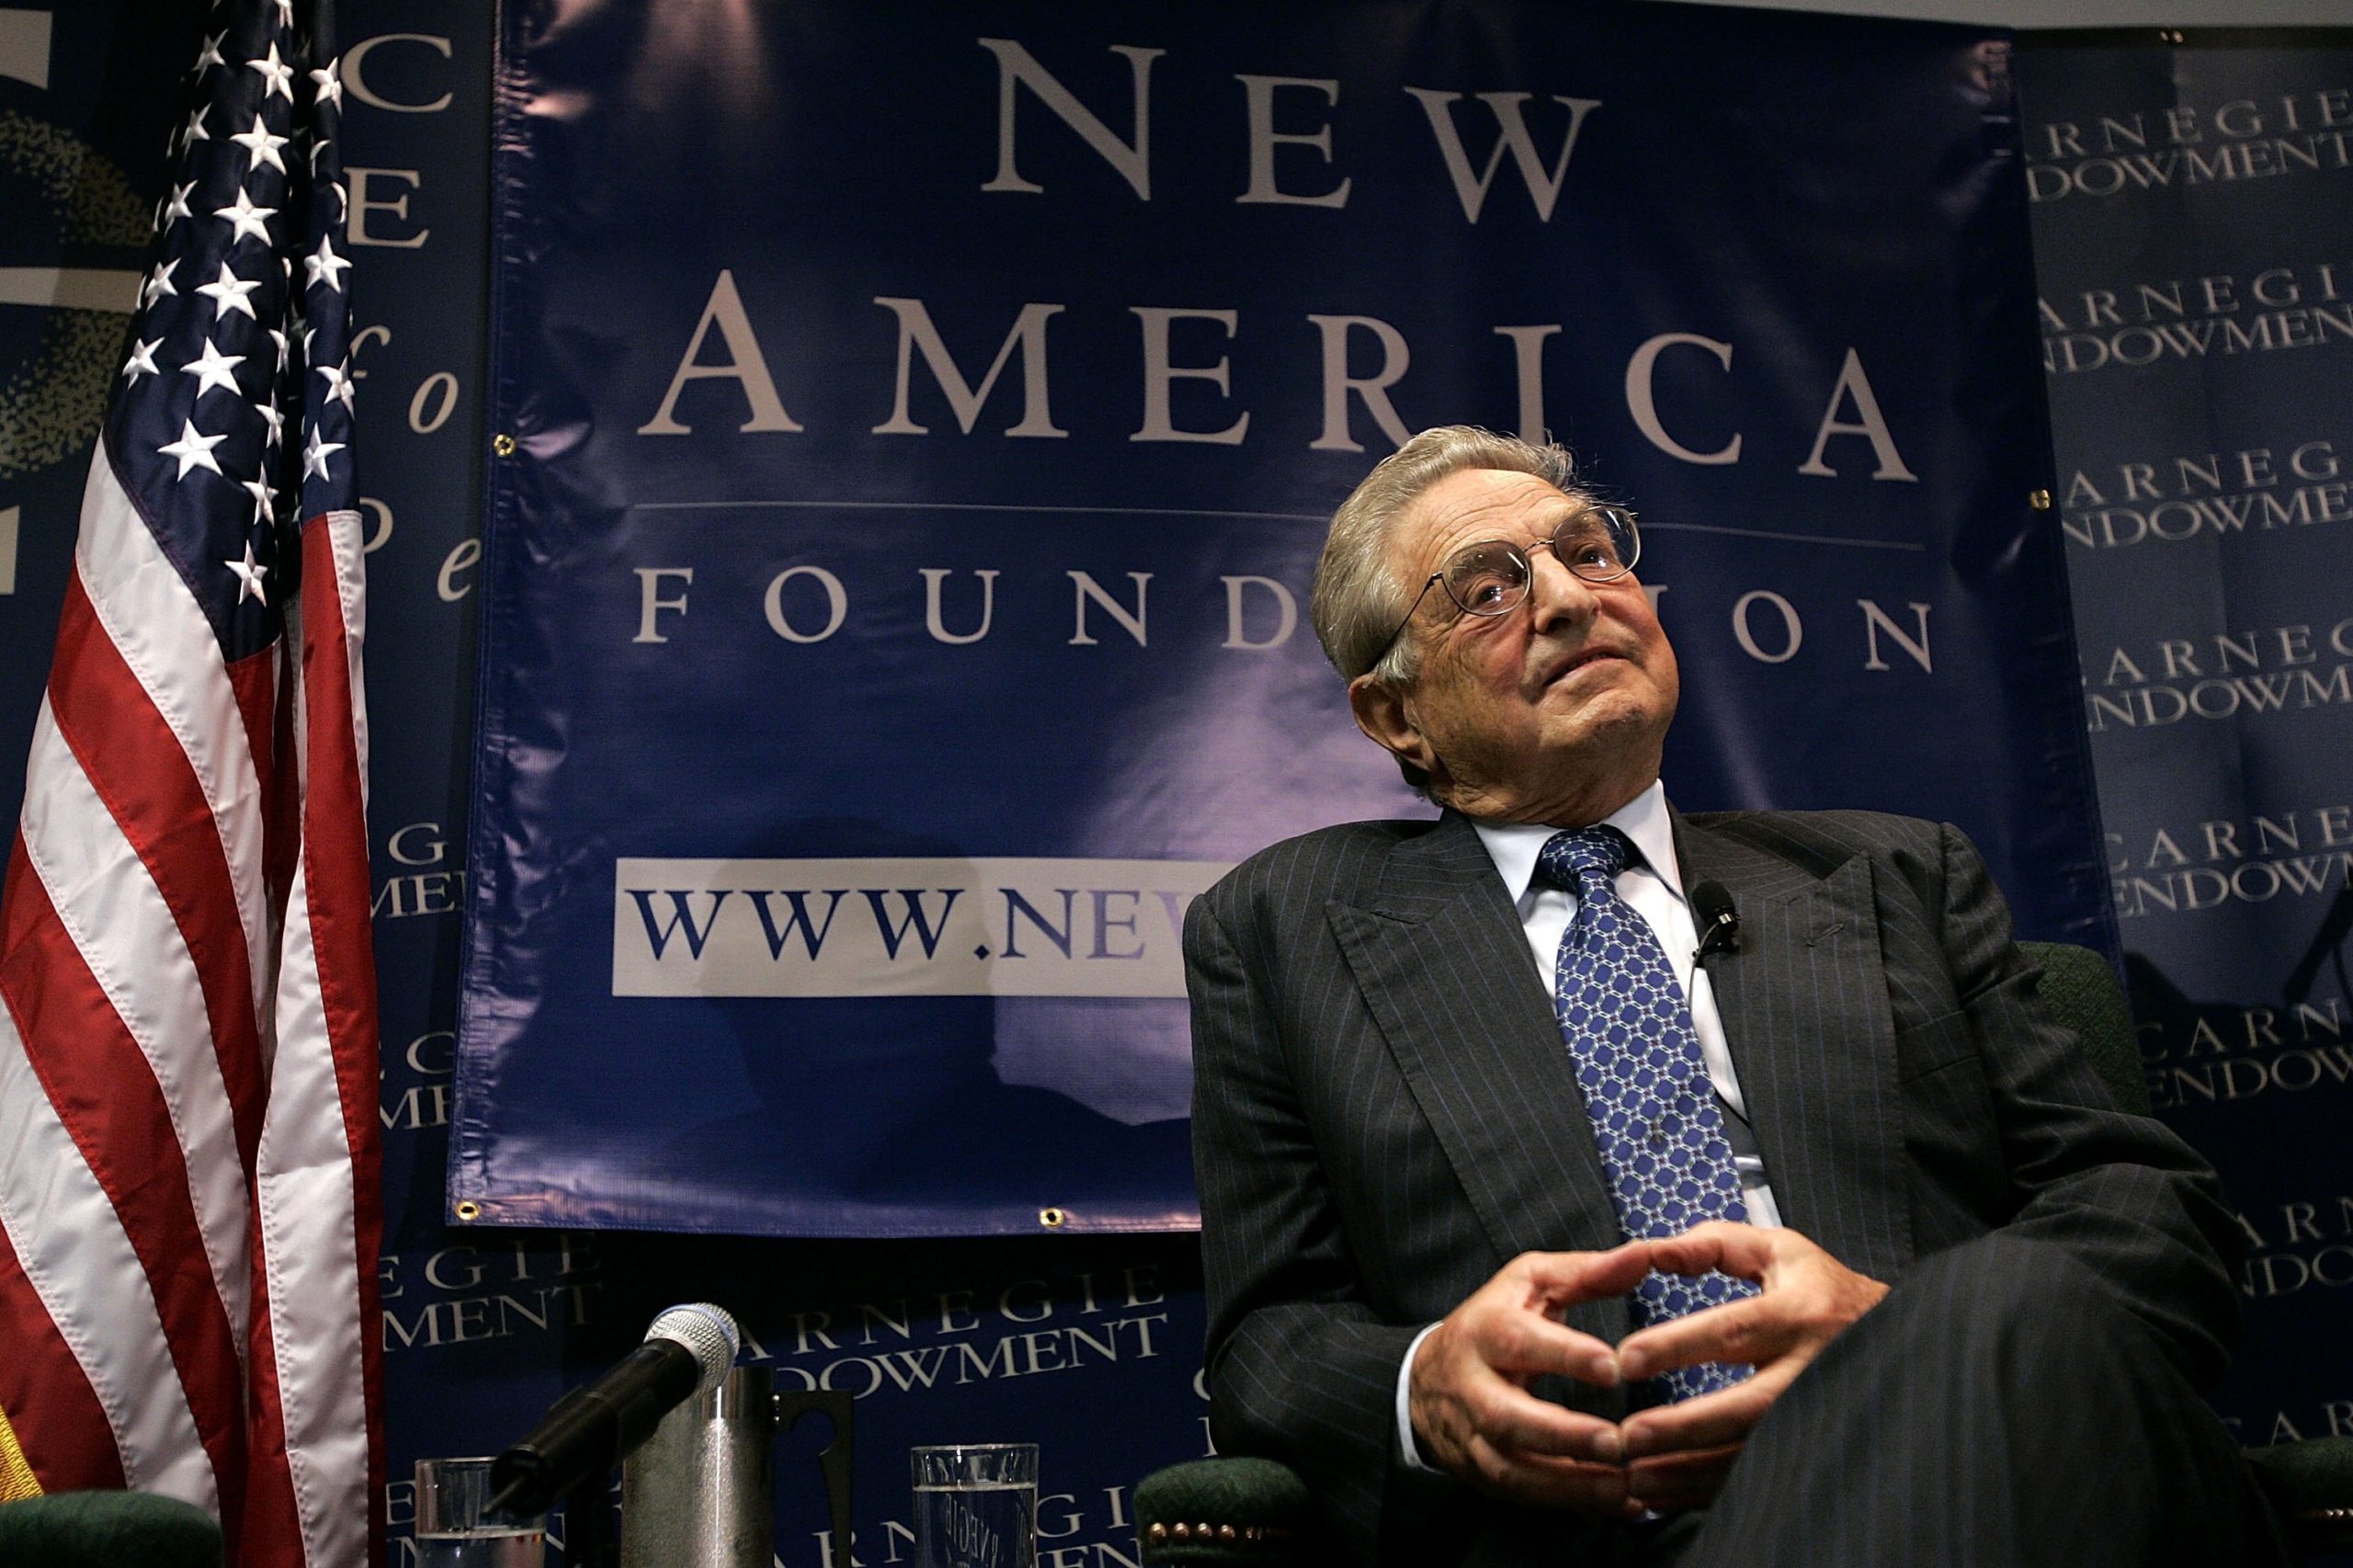 WASHINGTON - SEPTEMBER 13: Investor George Soros speaks during a program hosted by the New America Foundation September 13, 2006 in Washington, DC. Soros spoke on a range of political issues during a question and answer session. (Photo by Win McNamee/Getty Images)